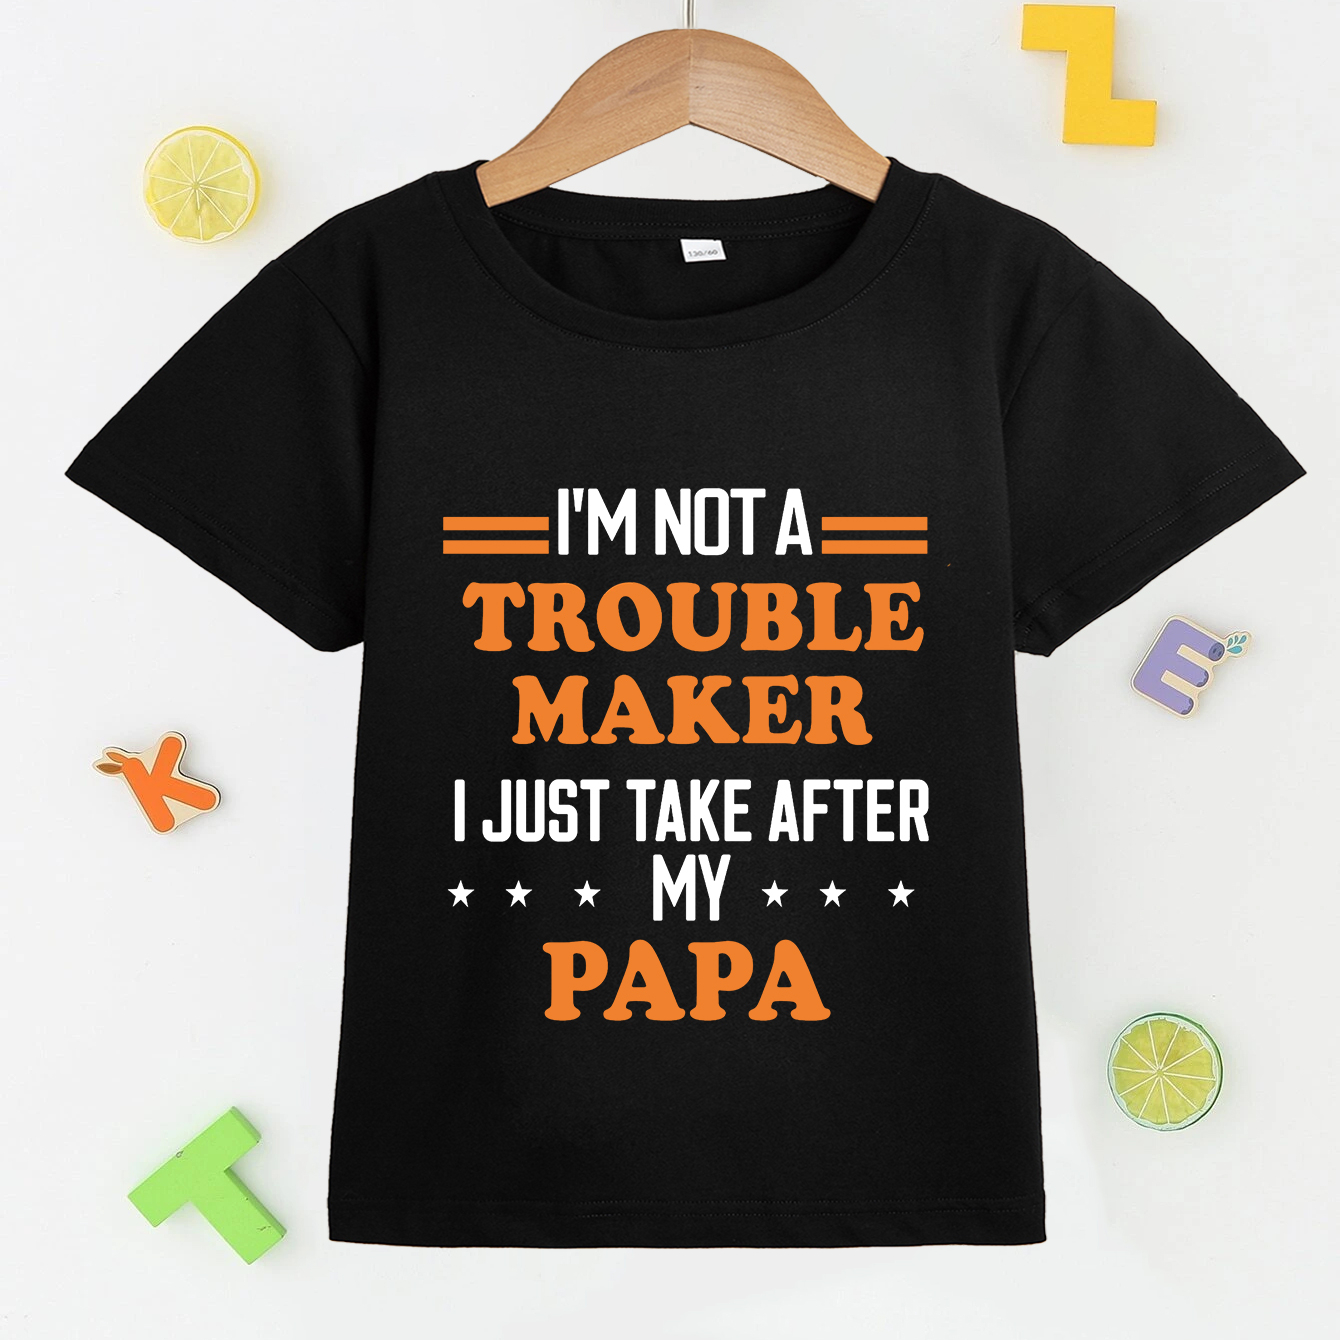 

Kid's Cotton T-shirt, I'm Not A Trouble Maker Print Short Sleeve Top, Casual Boy's Tee For Summer